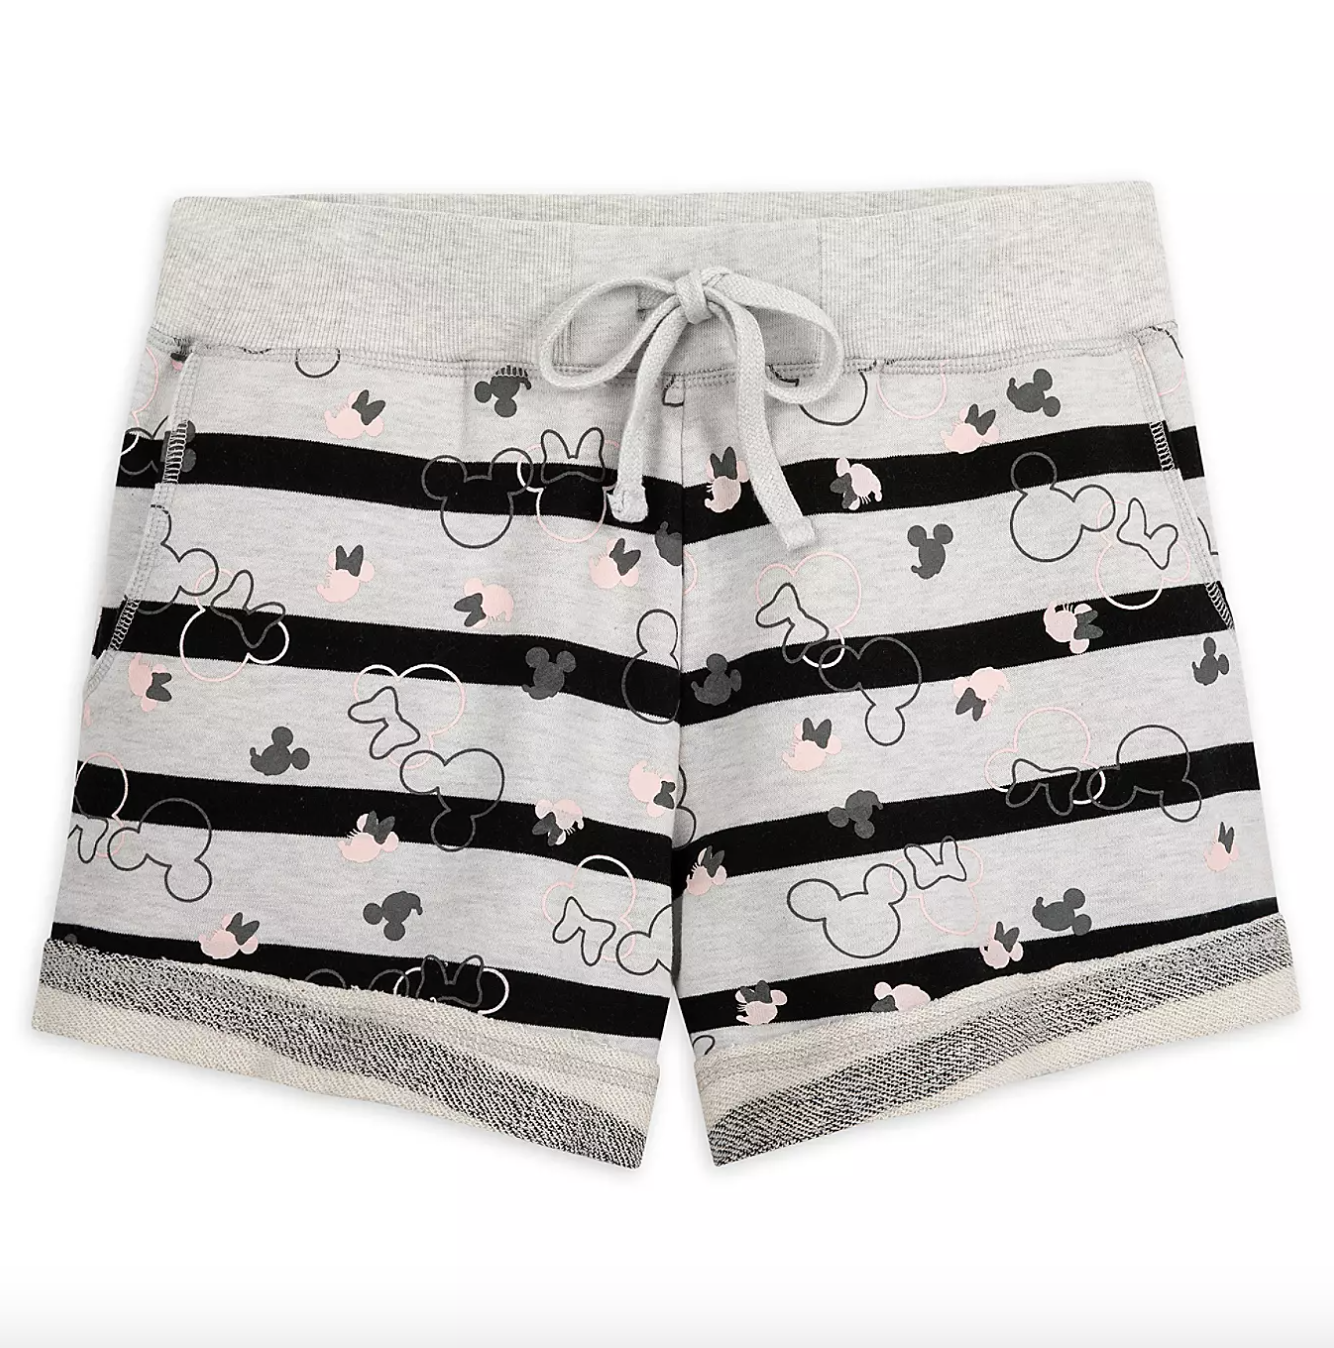 the gray shorts, which have Mickey and Minnie icon print, screen art &#x27;&#x27;Walt Disney World&#x27;&#x27; on waistband, a wide ribbed elastic waistband and drawstring tie
